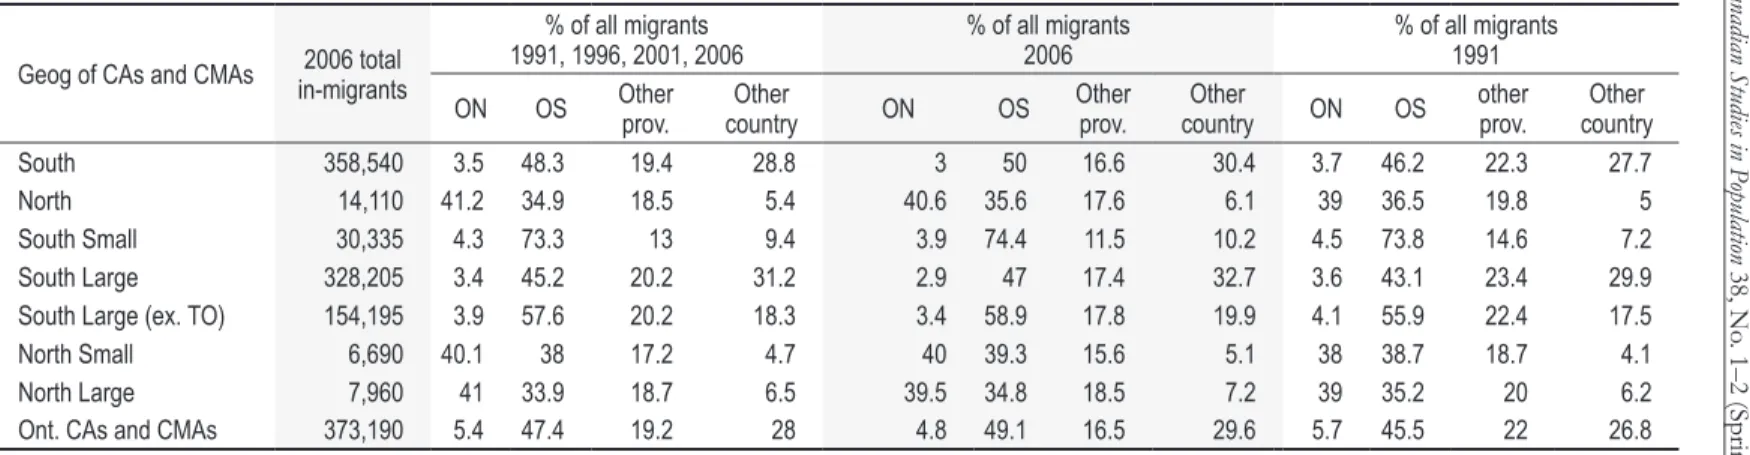 Table 5. Education and knowledge jobs of in-migrants to Ontario CMAs and CAs, 1991–2006.